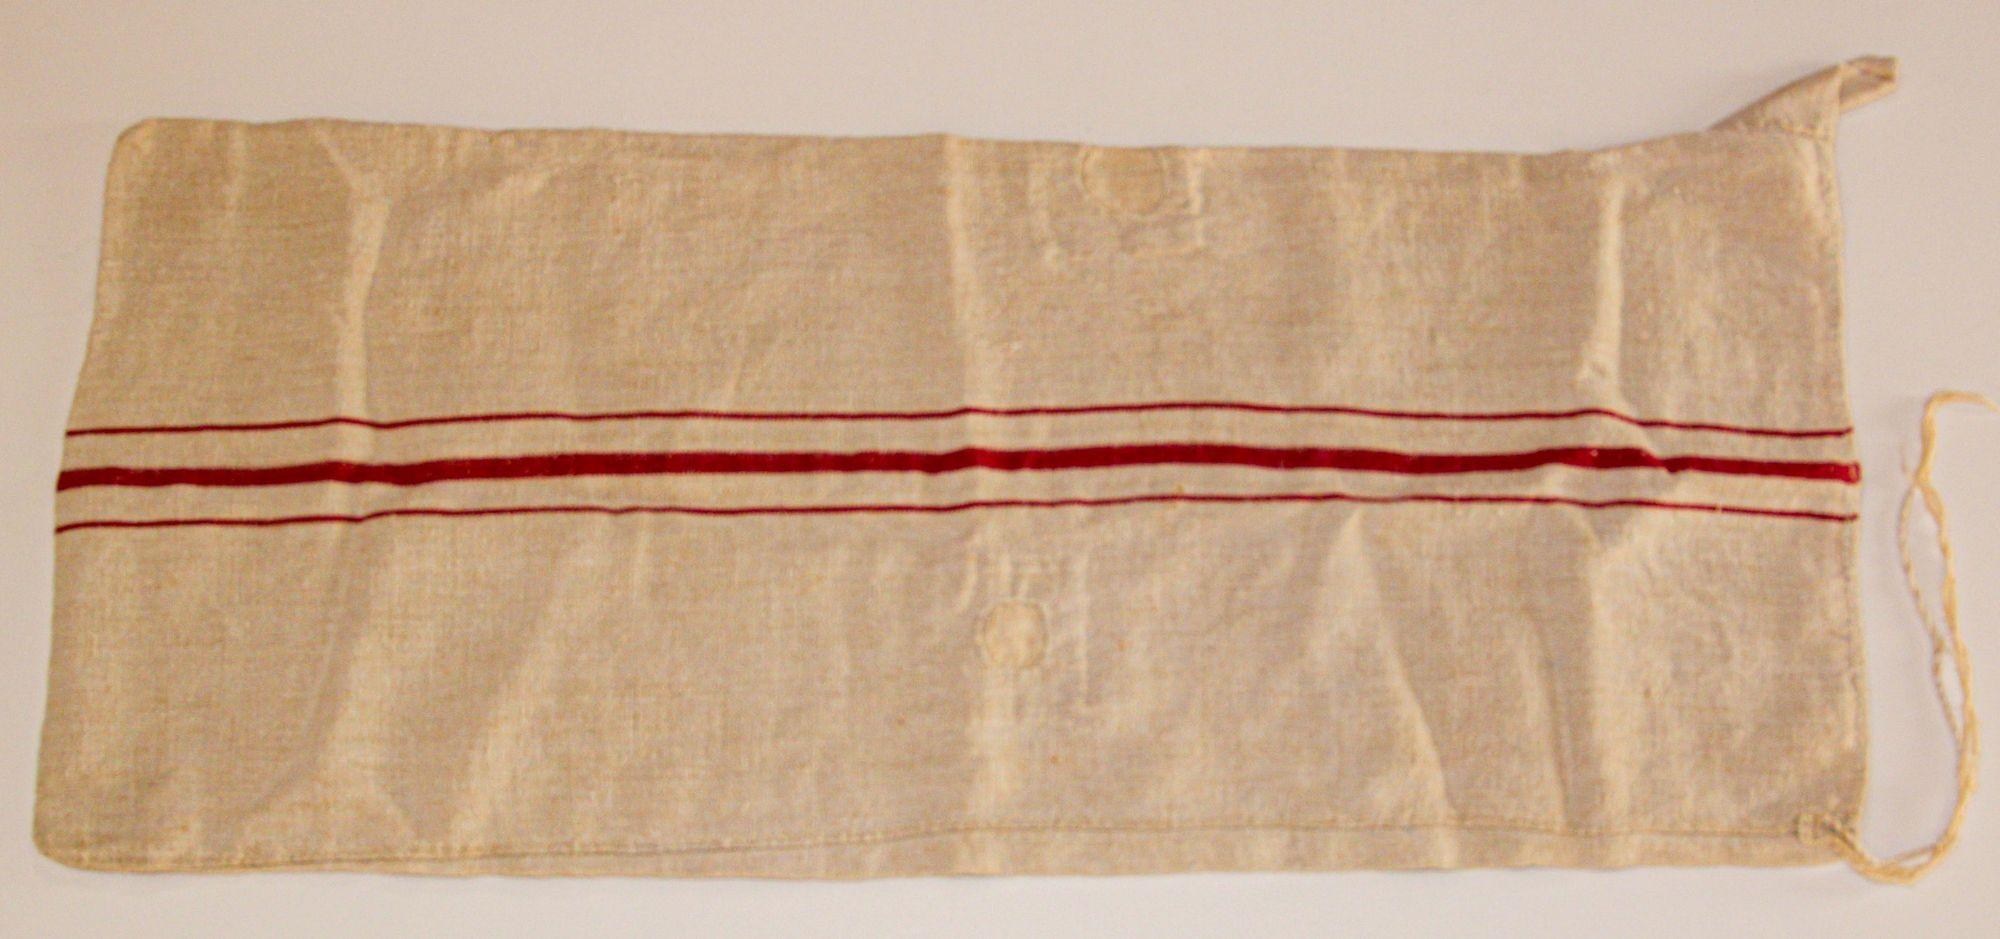 Antique European French long grain sack homespun linen fabric with red striped.
A large grain bag made of a narrow woven length of homespun linen that was folded over and hand-stitched along the long sides.
Antique grain sack, handwoven and hand